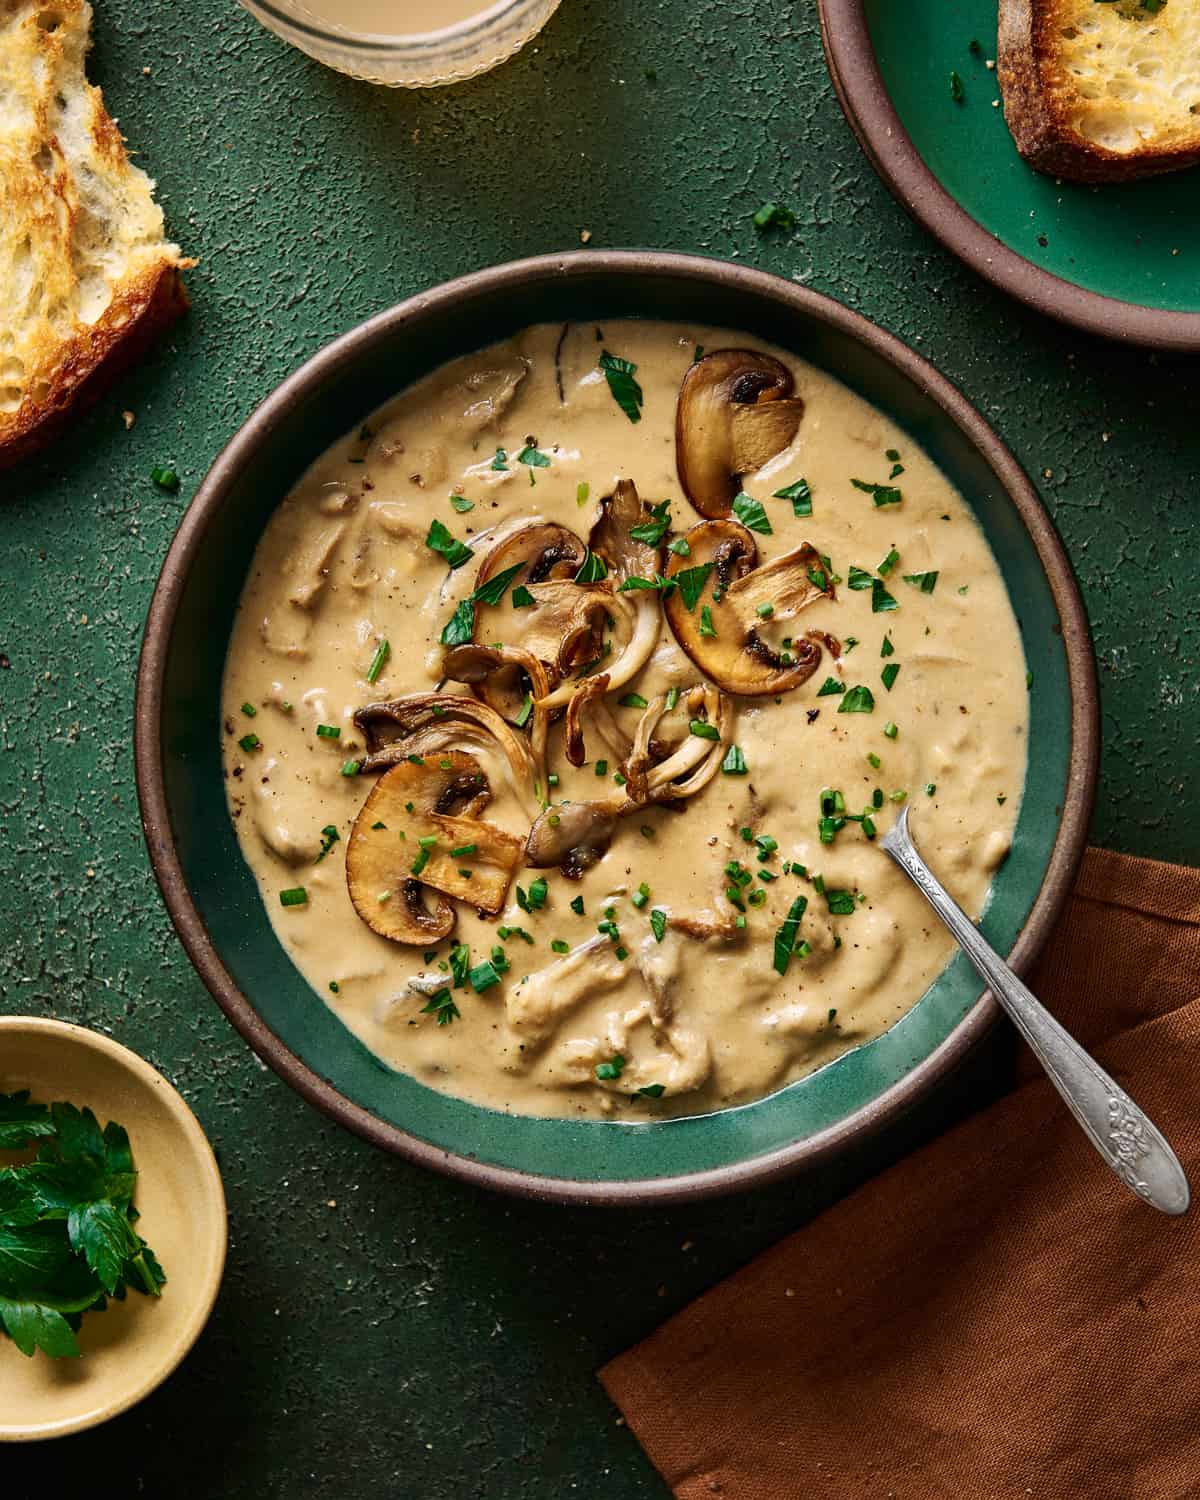 creamy vegan mushroom soup with seared mushrooms on top in a green ceramic bowl on a green table.